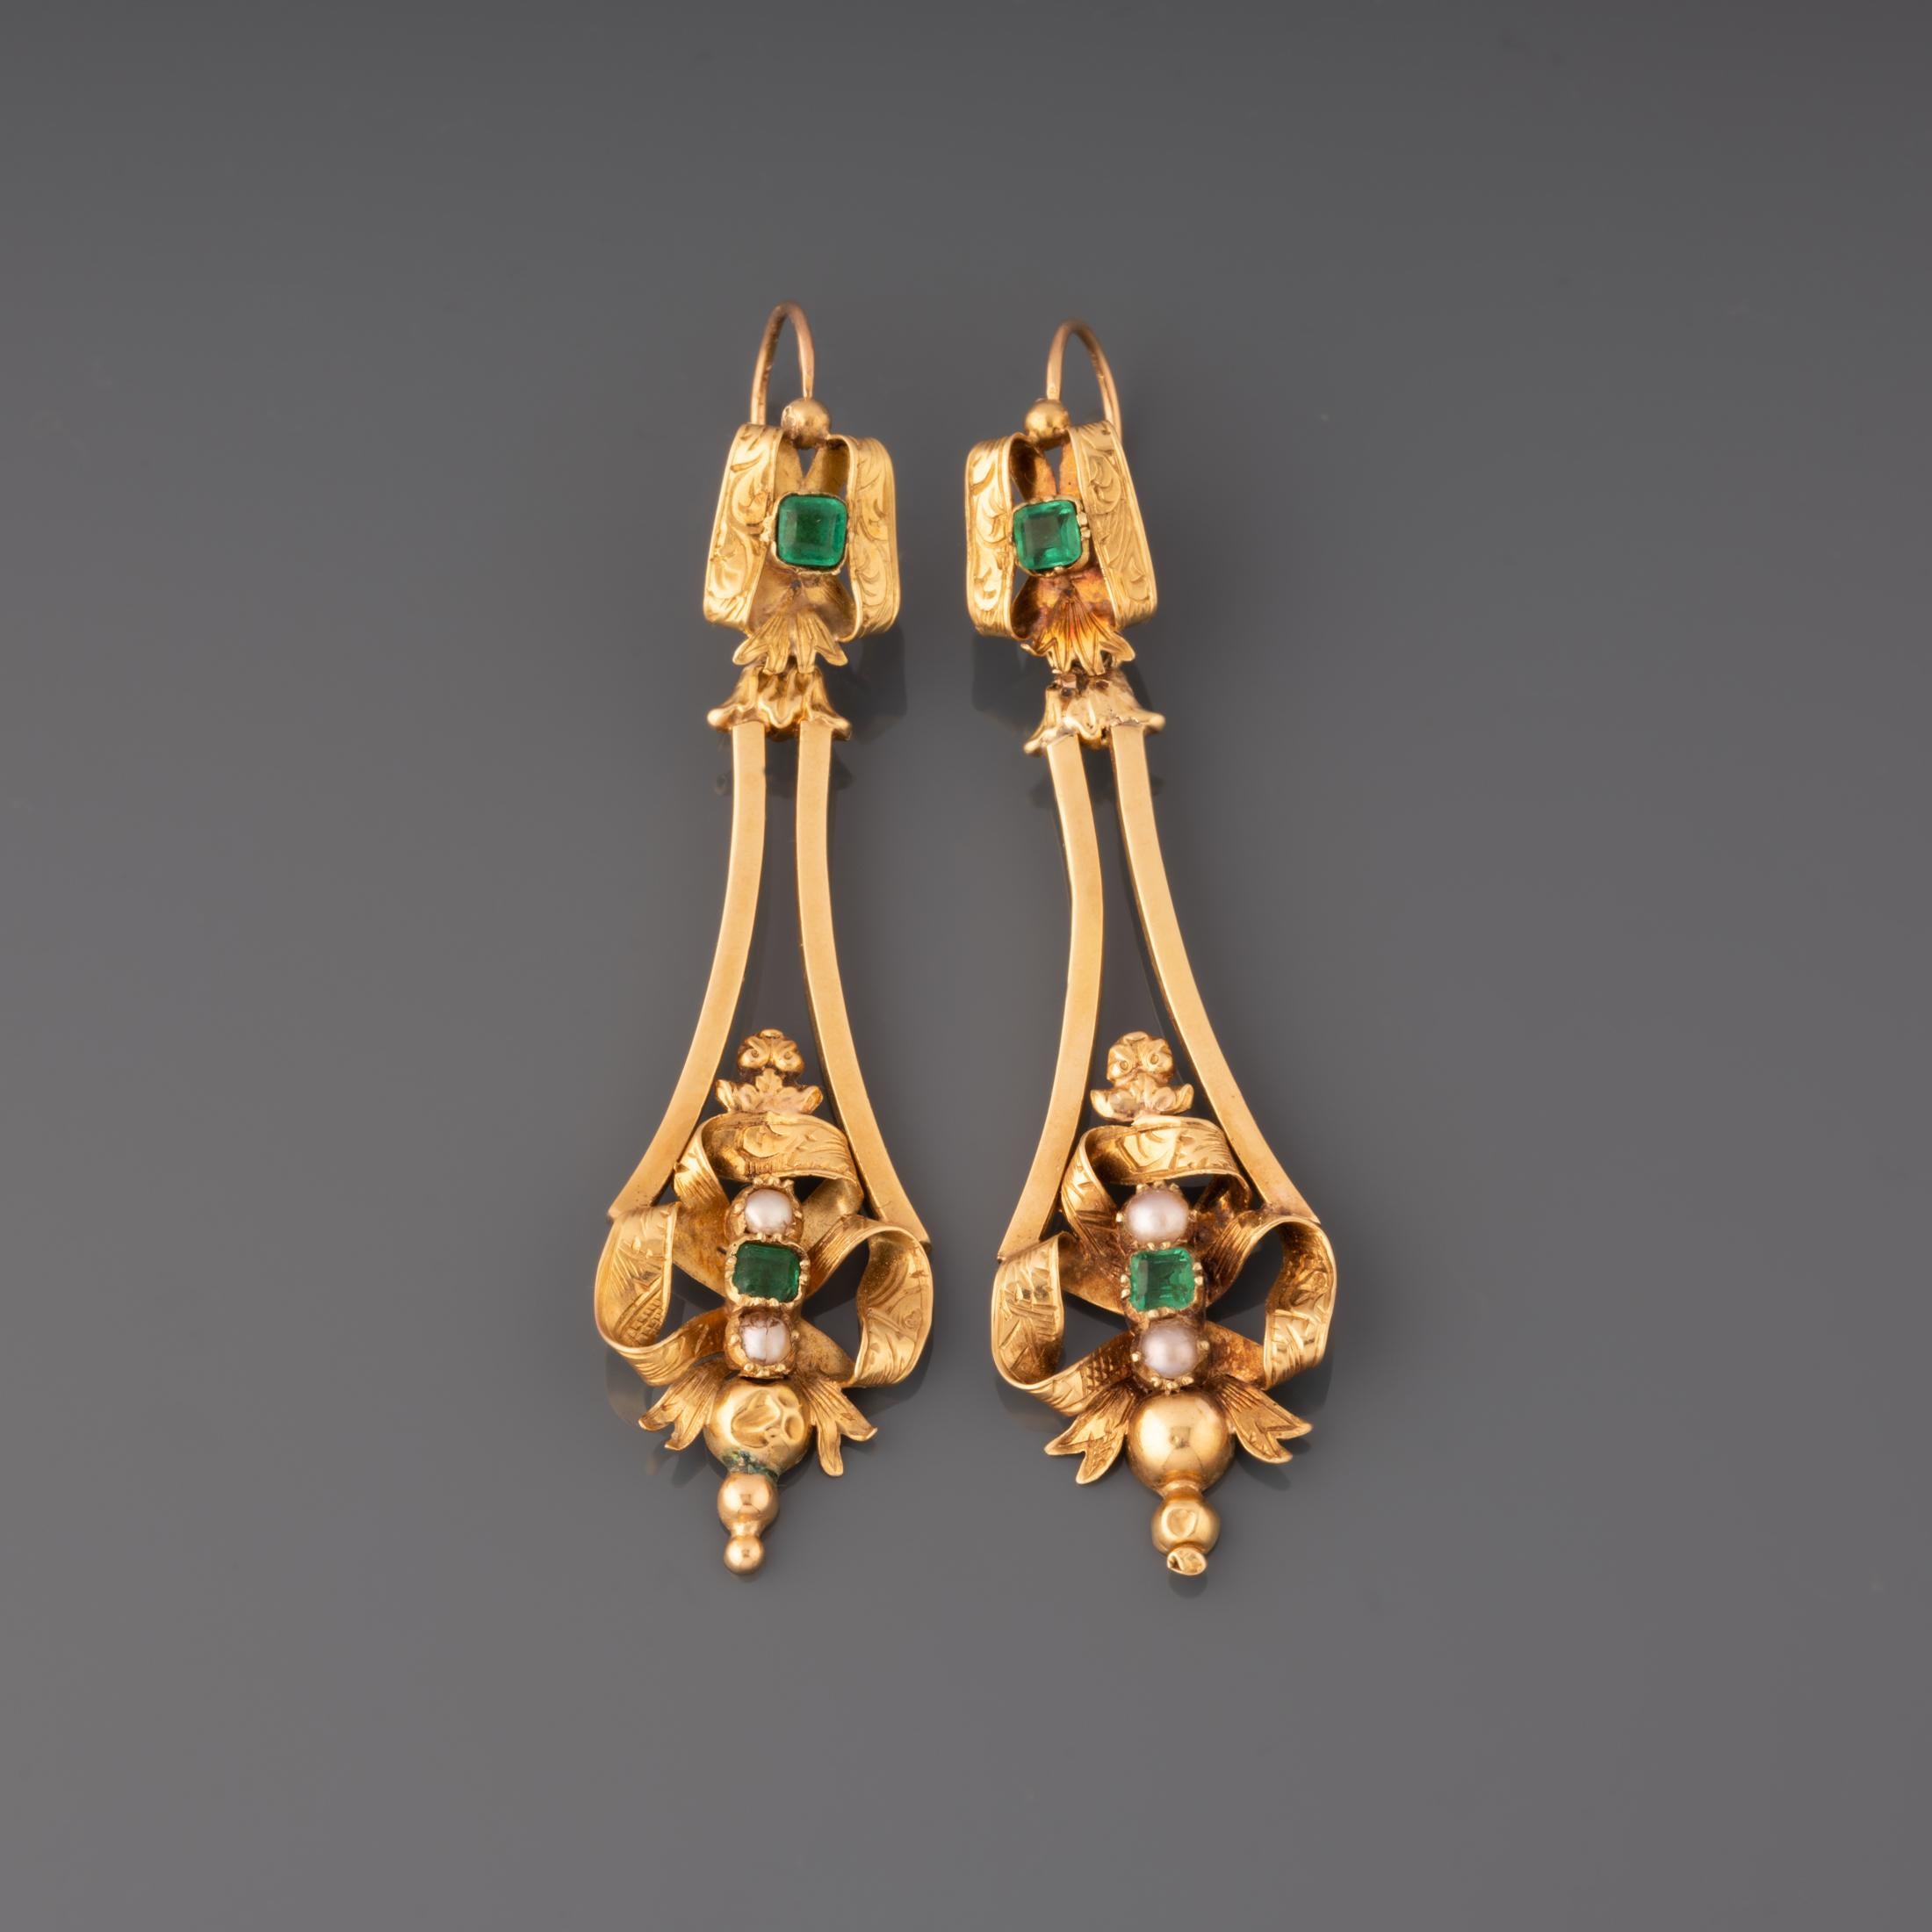 A very lovely pair of antique earrings, early 19th century made.
Made in yellow gold 18K. Hallmark of maker L N (Unknown).
69 mm height. 17mm width.
Weight: 7.80 grams